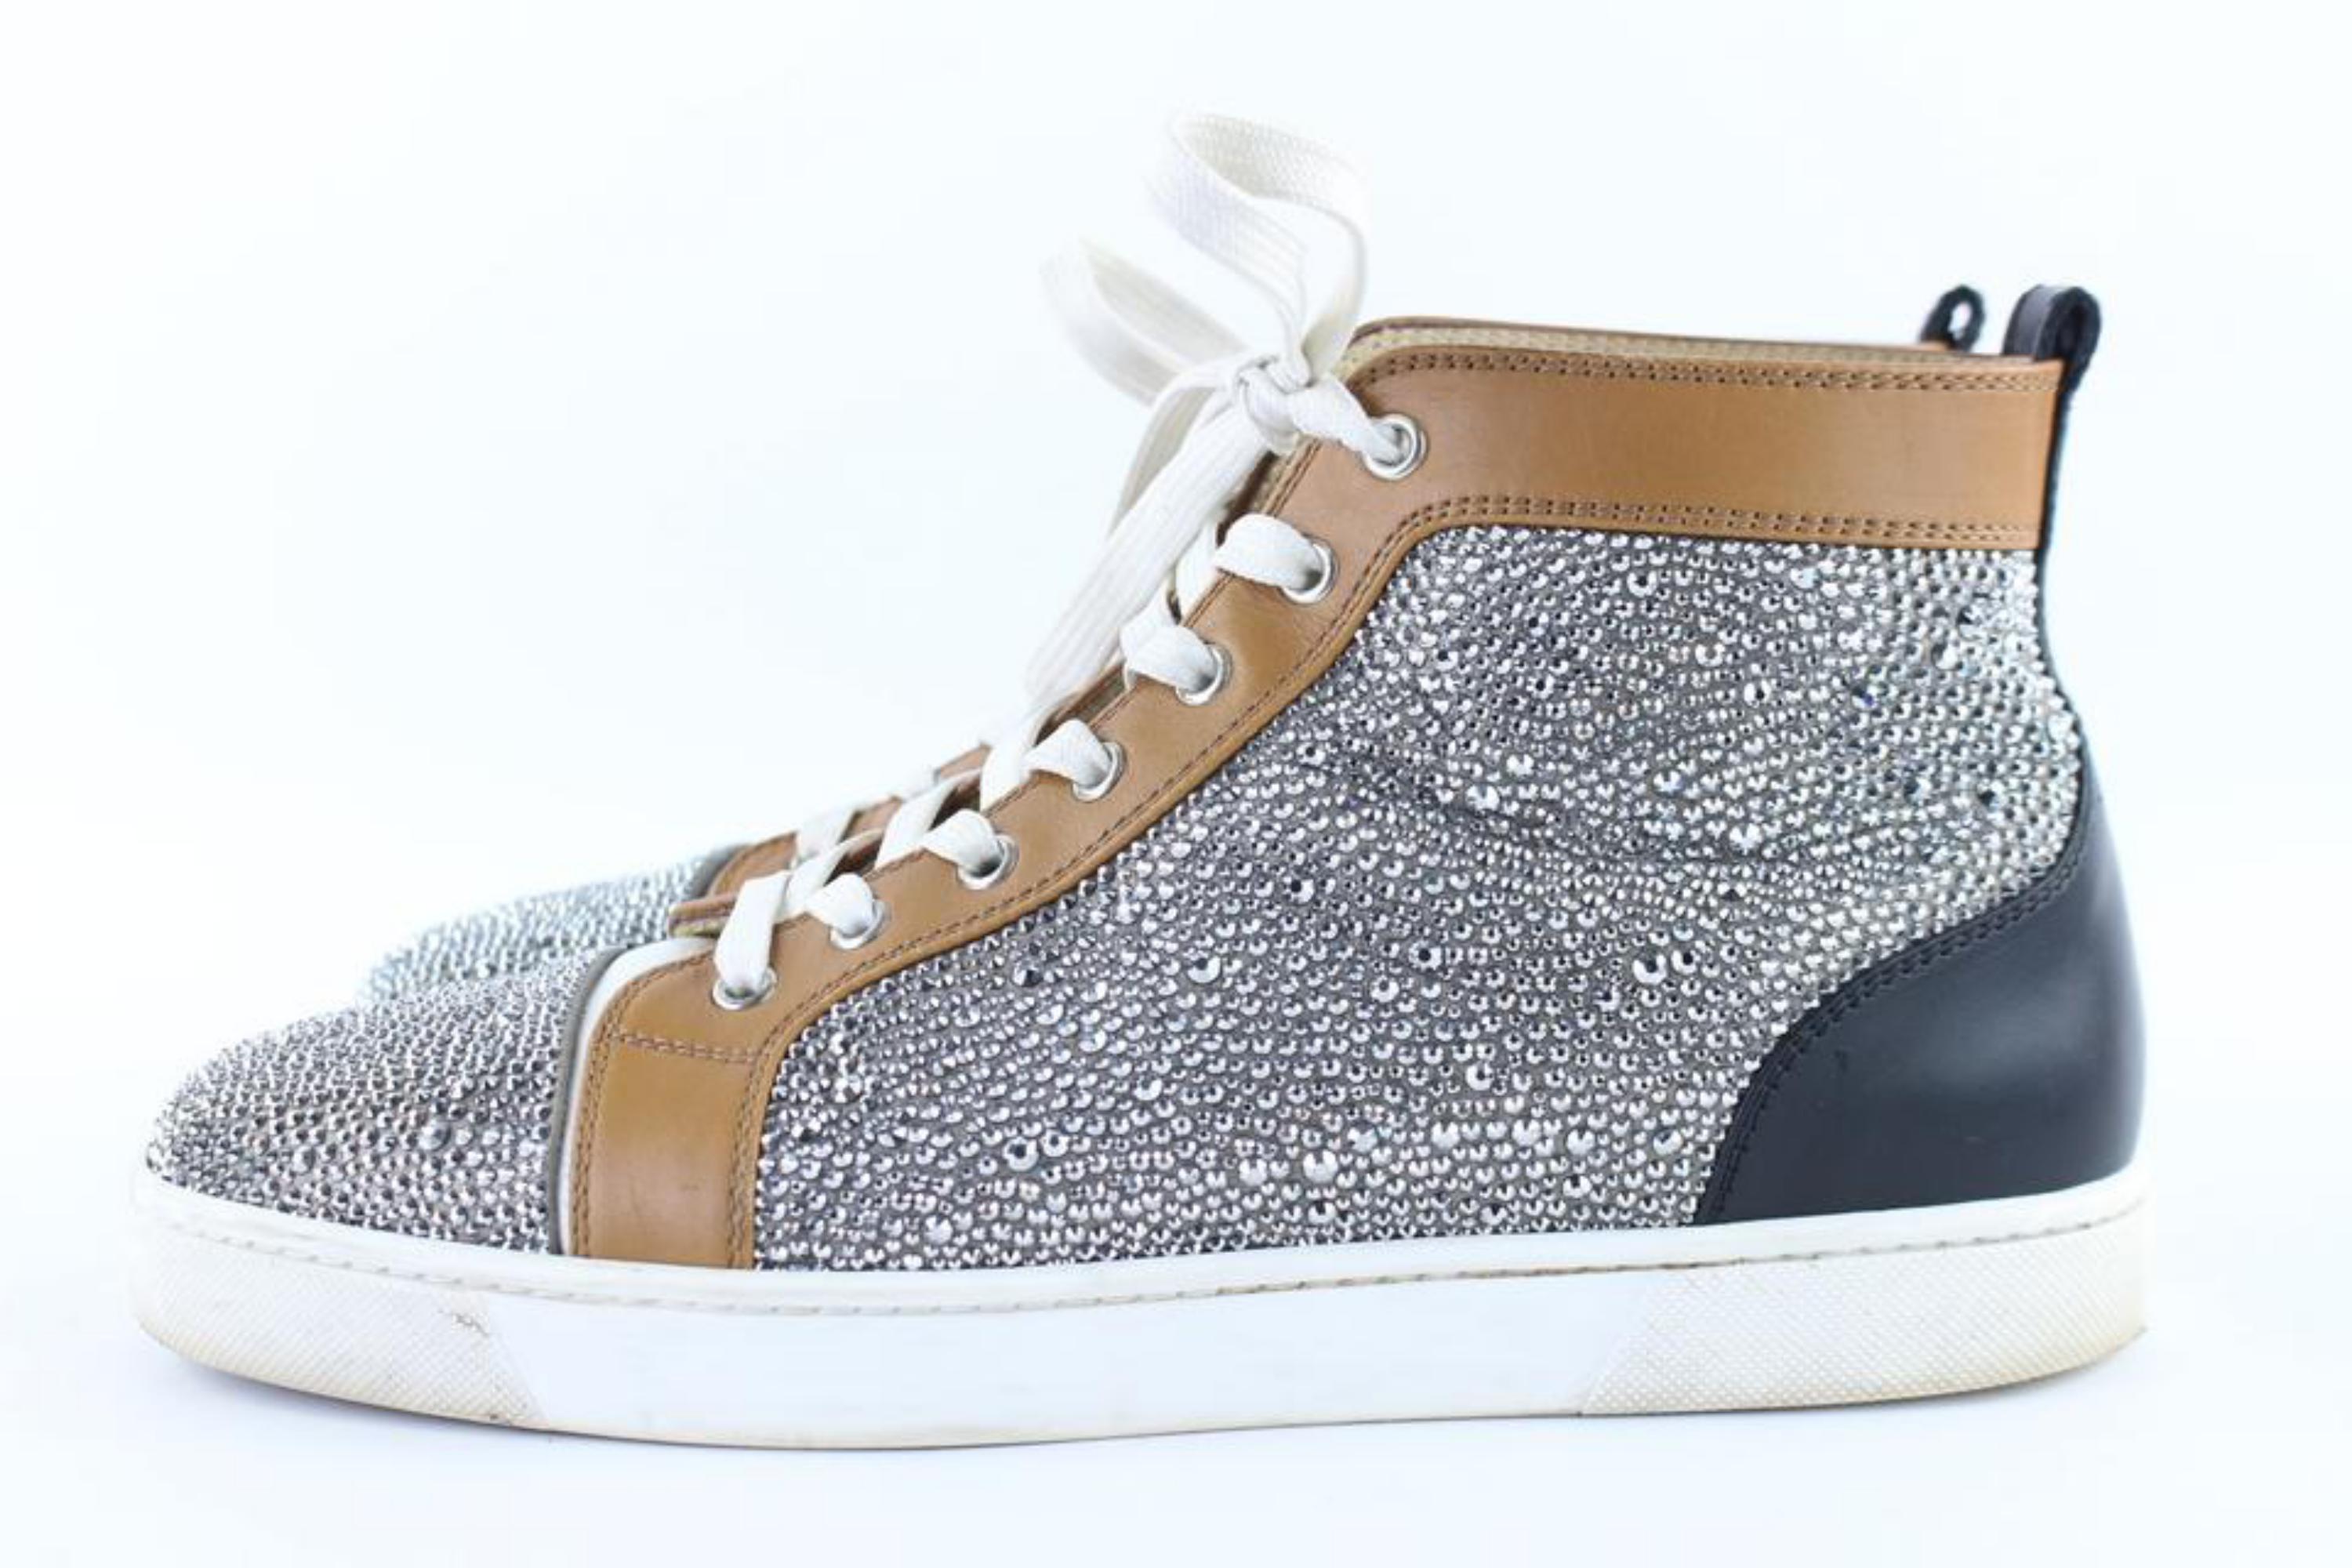 Christian Louboutin Crystal Strass Louis High Top Sneaker 10clb1222 Boots/Bootie For Sale 3